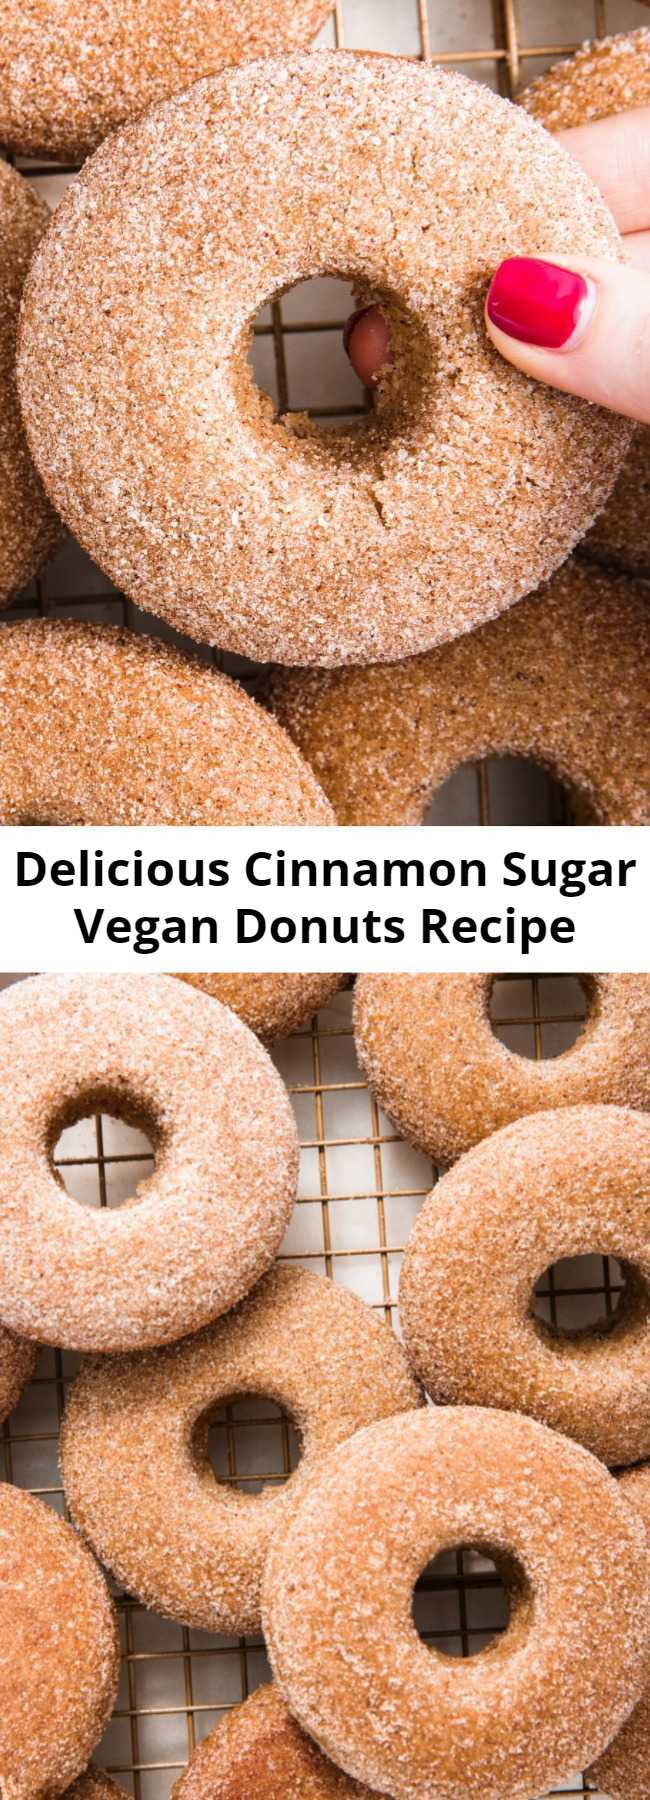 Delicious Cinnamon Sugar Vegan Donuts Recipe - Donuts...that are delicious and vegan?! Believe it. Made with almond flour and dairy-free butter, these Vegan Donuts are a dream come true.